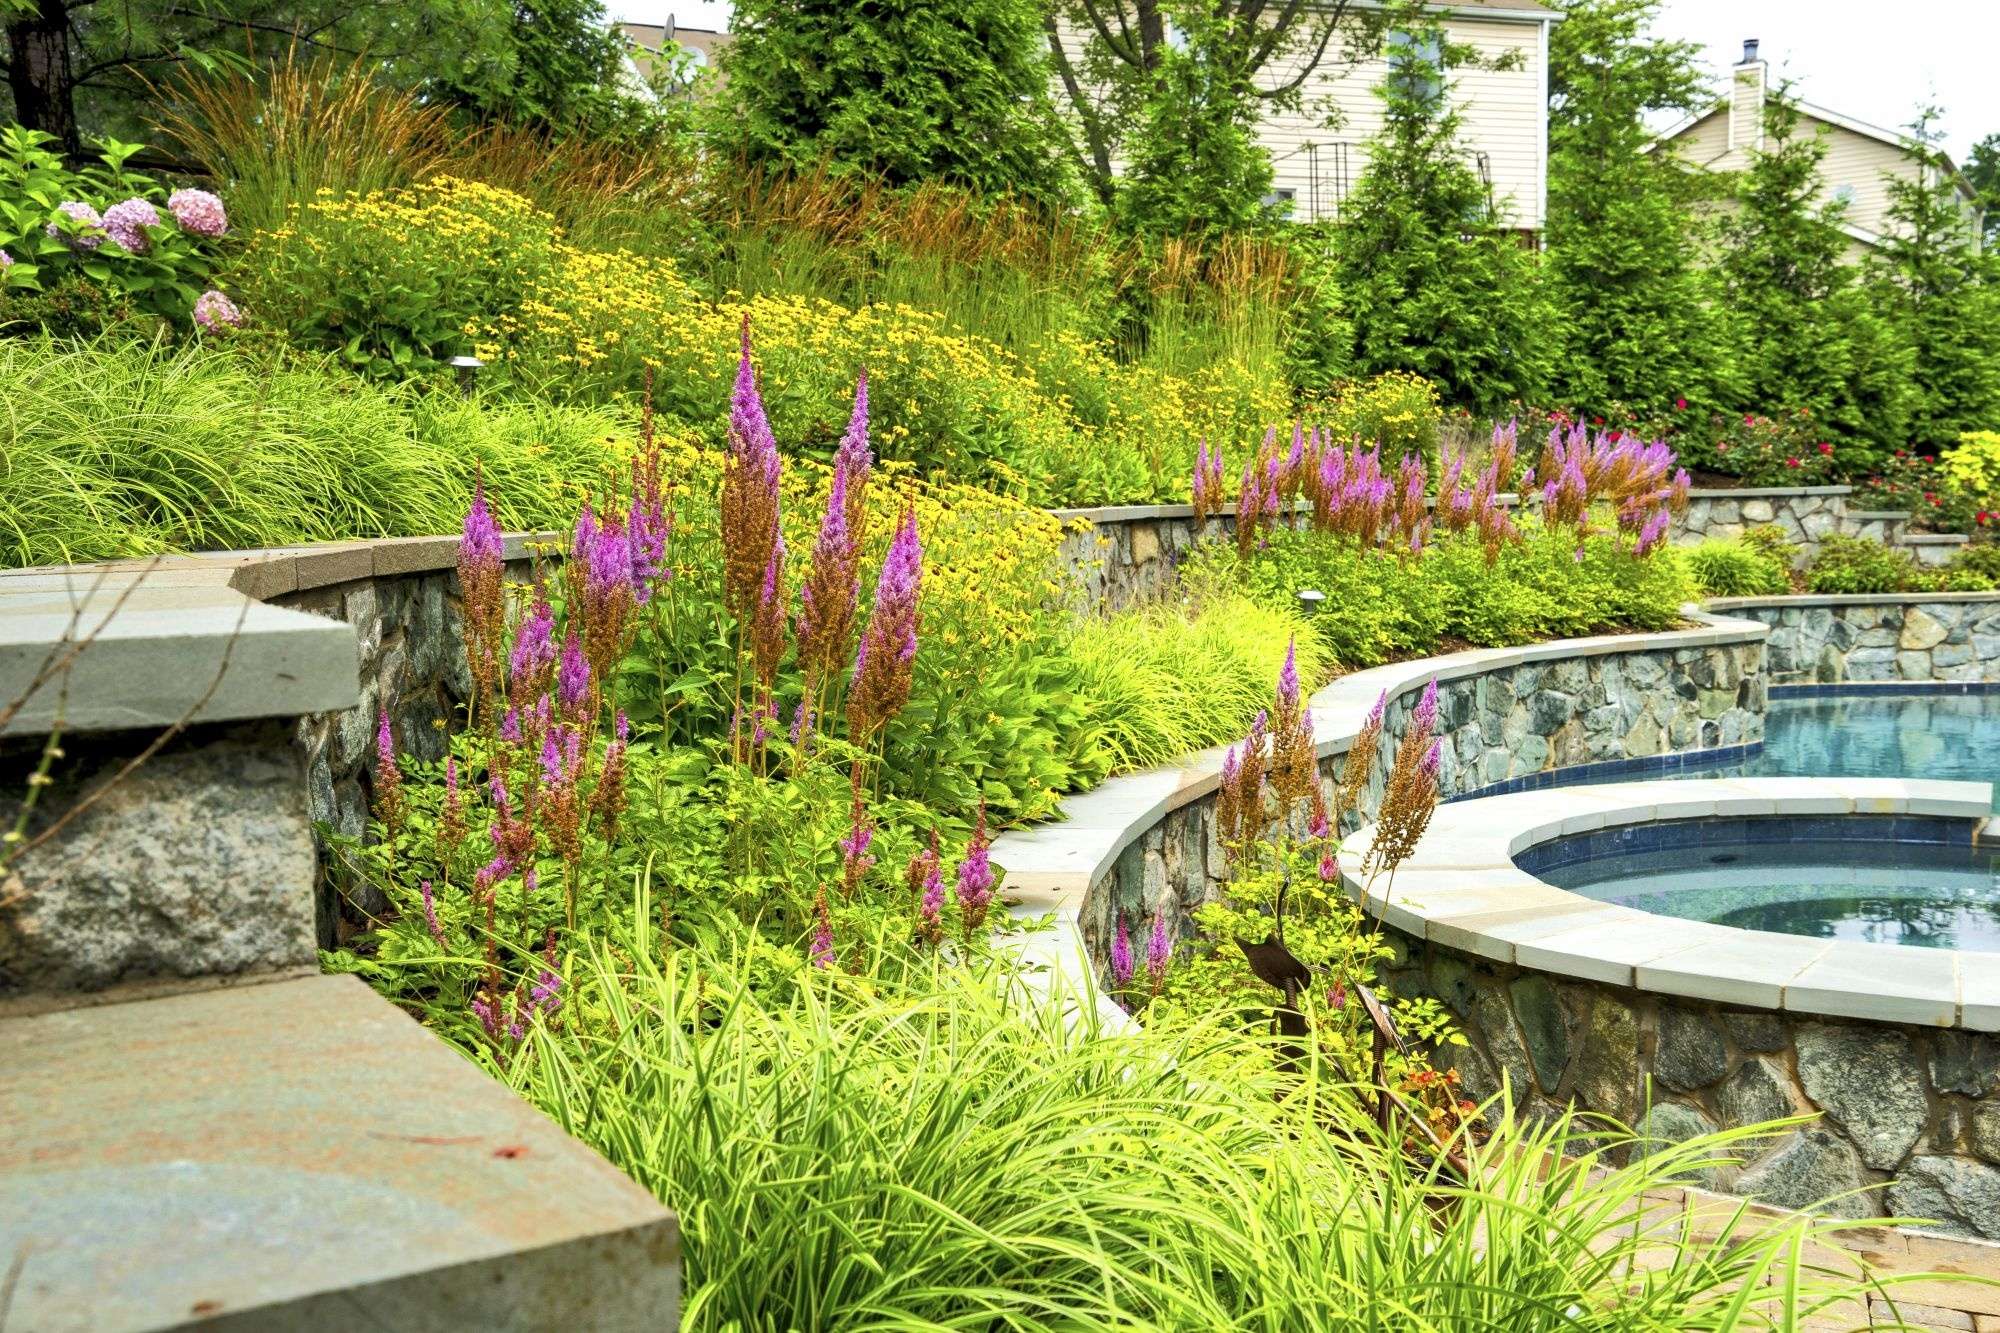 Swimming pool design and plants for privacy